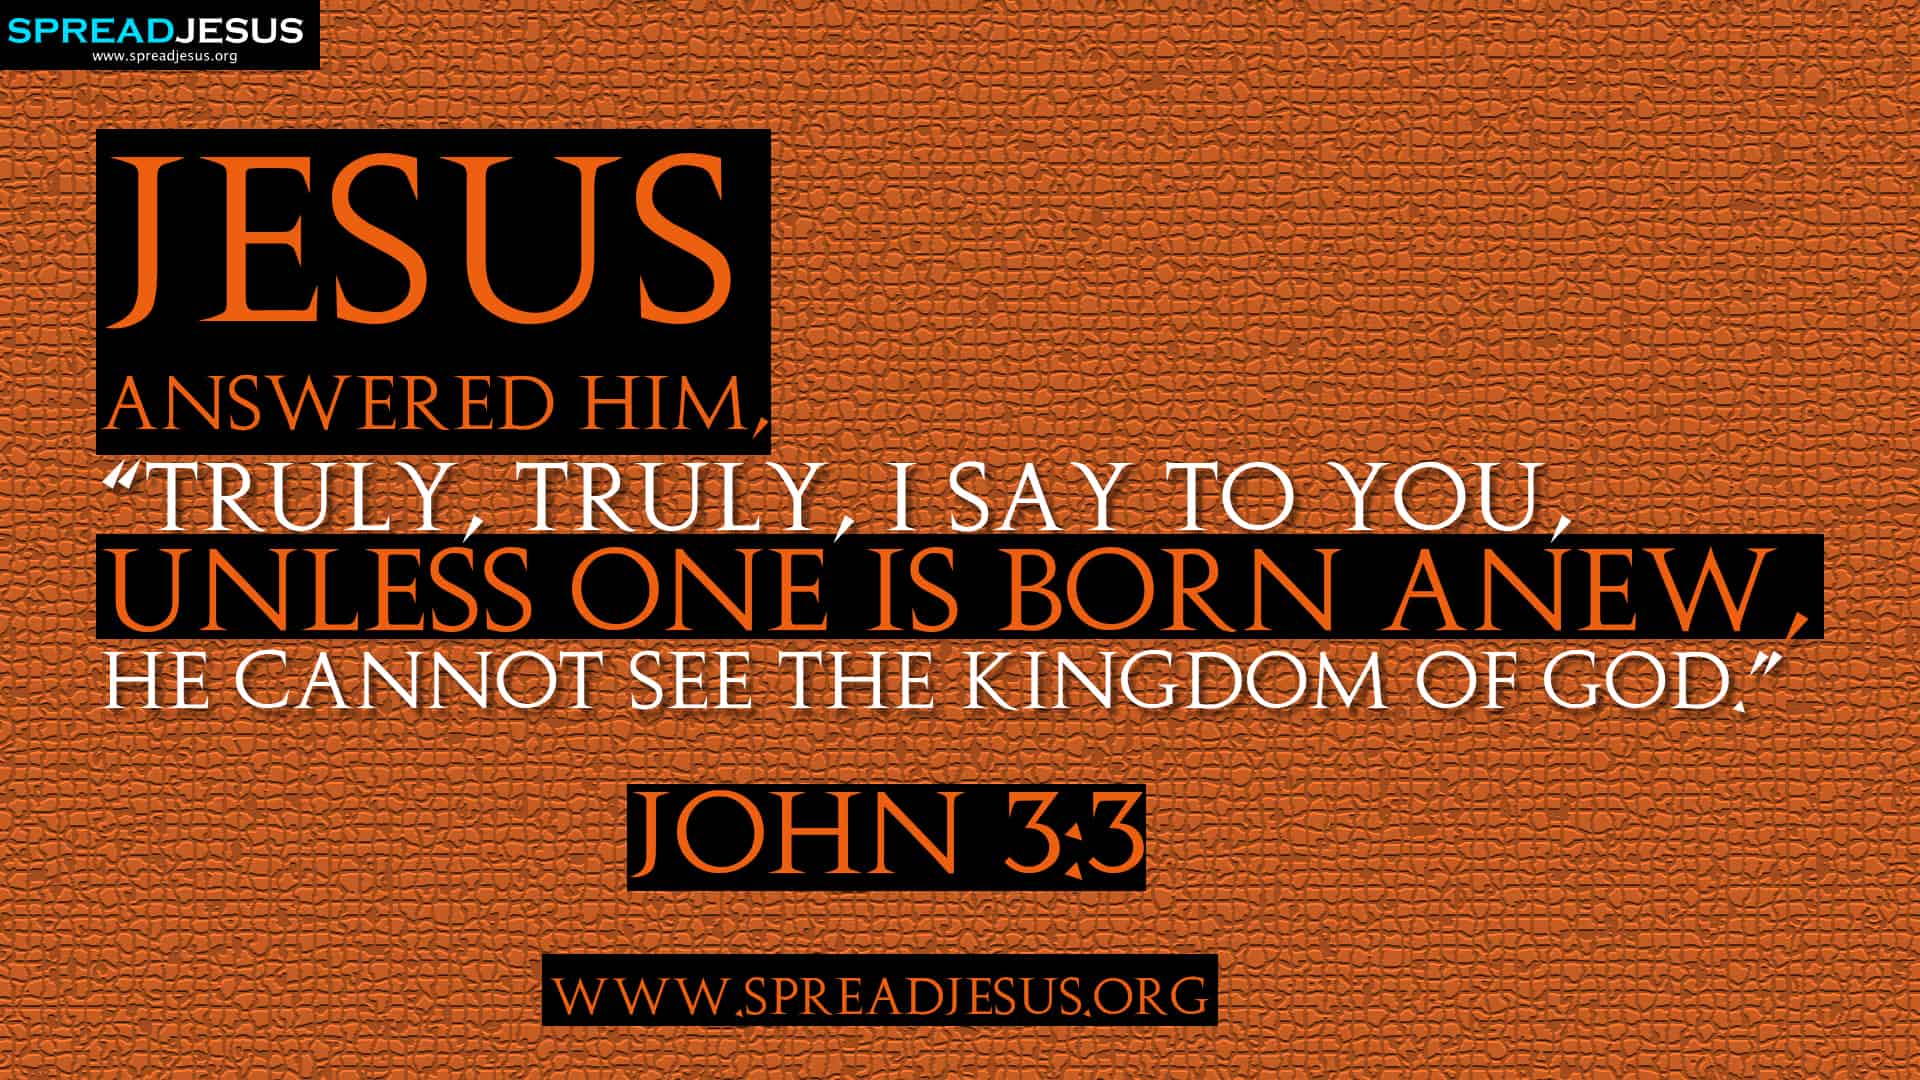 BIBLE QUOTES HD WALLPAPERS JOHN 3:3 FREE DOWNLOAD Jesus answered